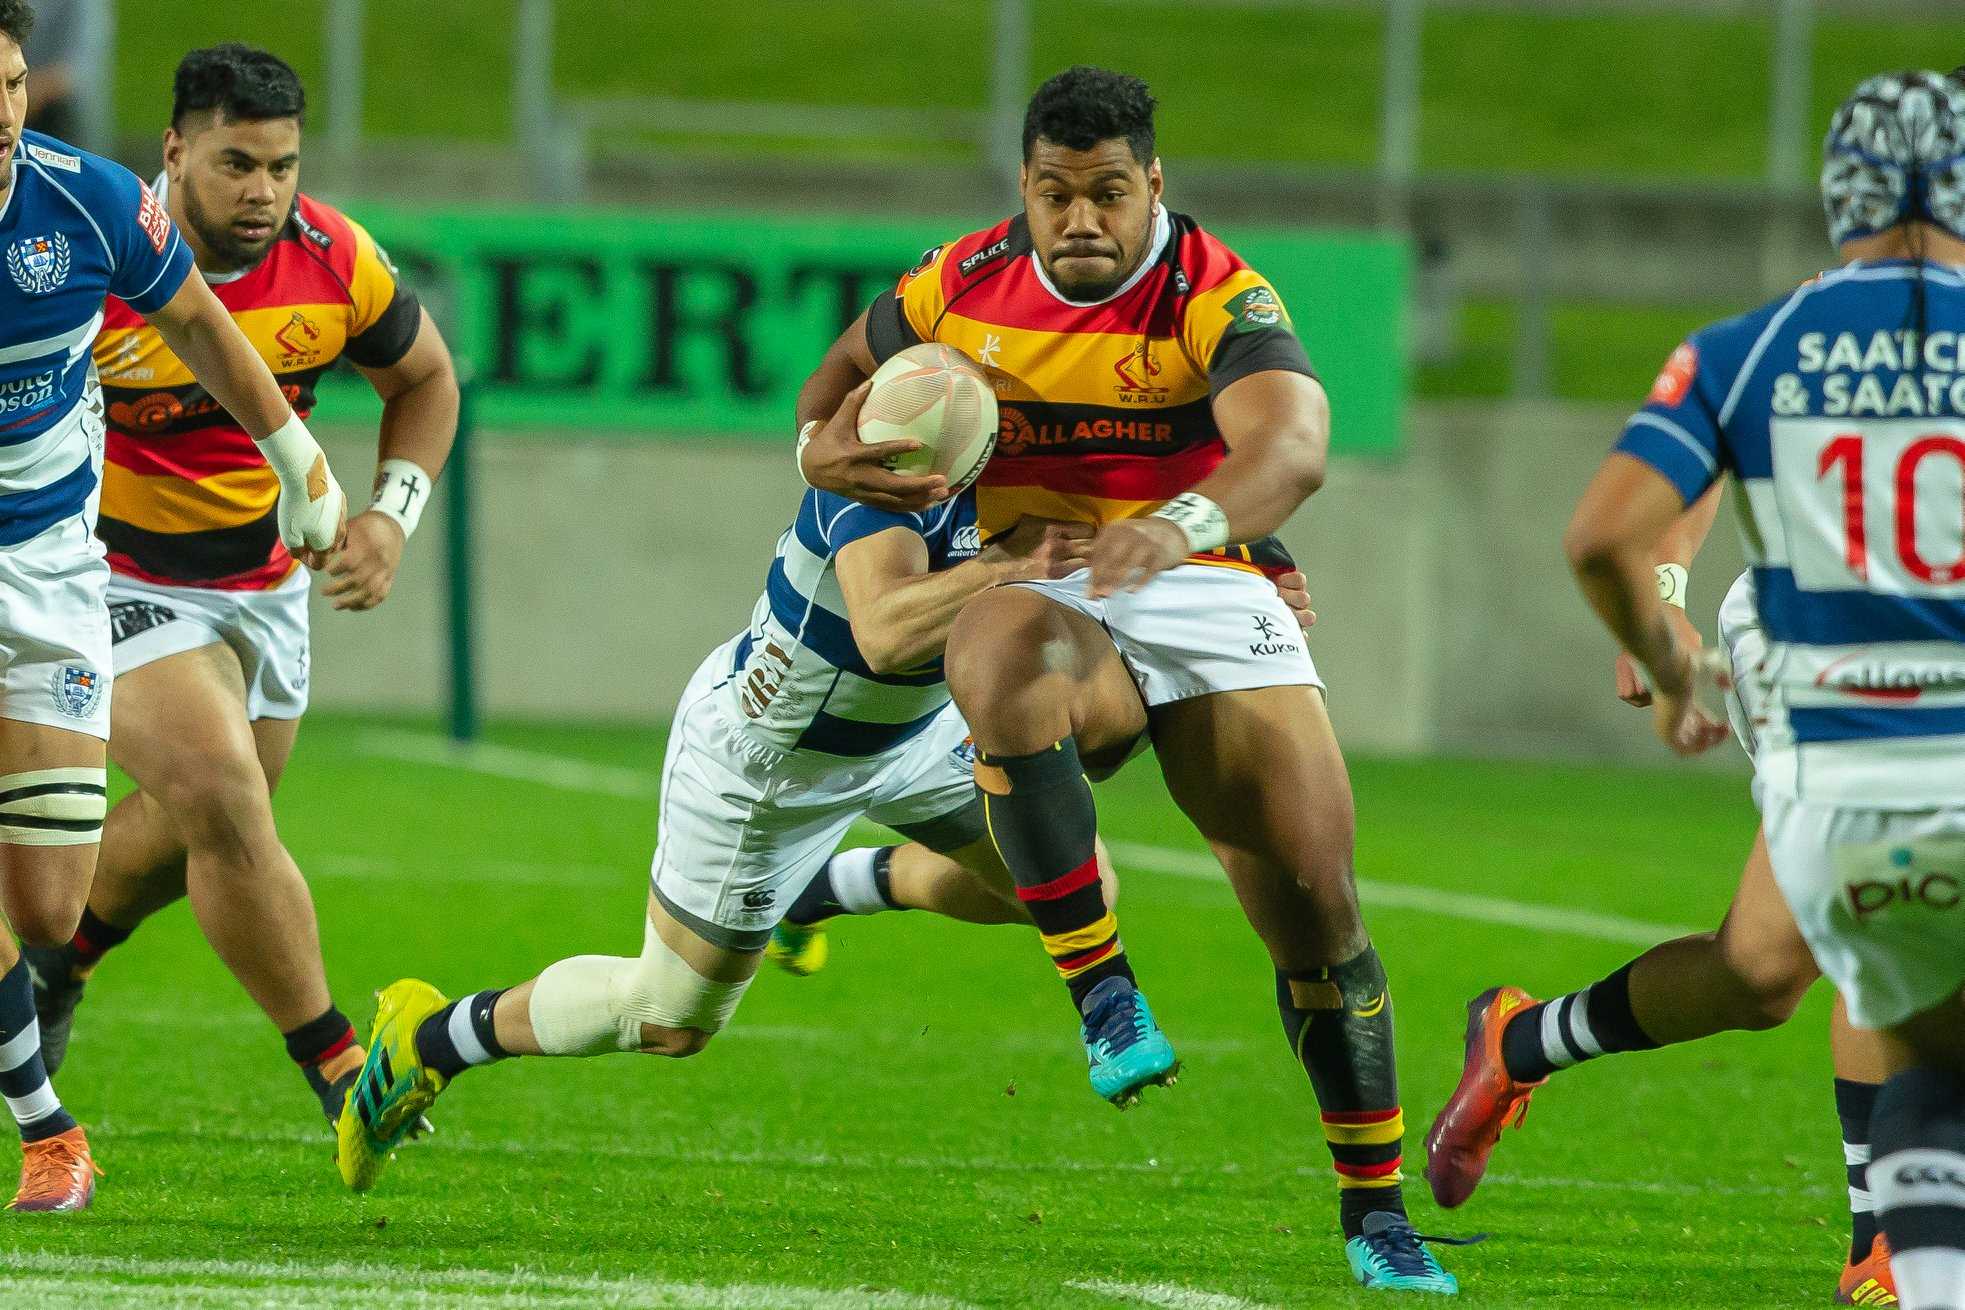 Waikato team named for Battle of the Bombays clash with Auckland